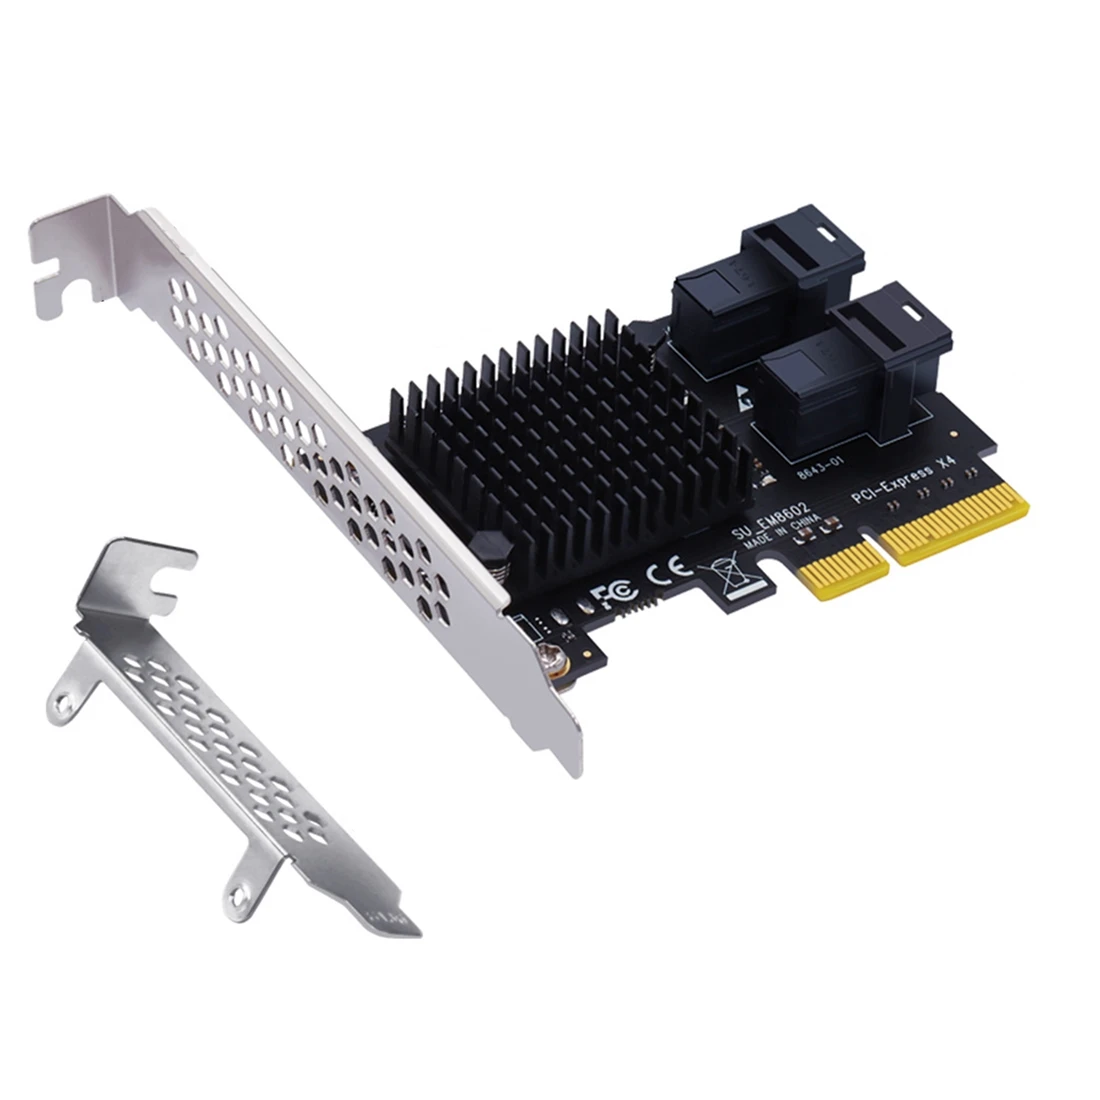 32gbps-pci-e-to-sff-8643-expansion-card-2-port-pci-ex4-to-u2-nvme-hard-disk-adapter-card-dual-port-split-free